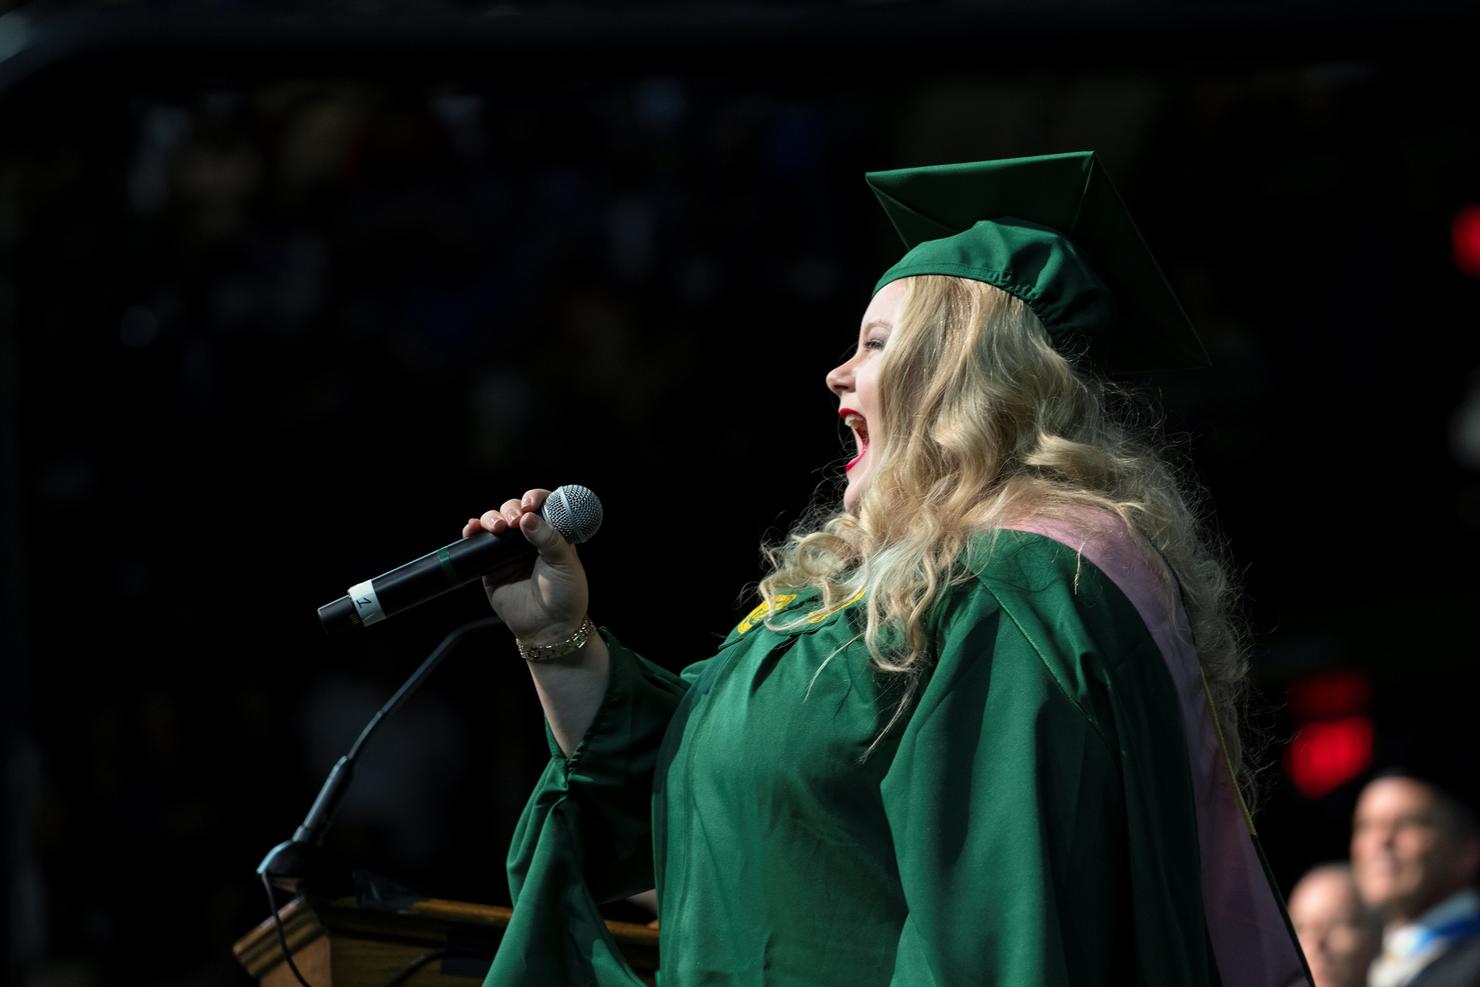 Student sings the National Anthem at Commencement